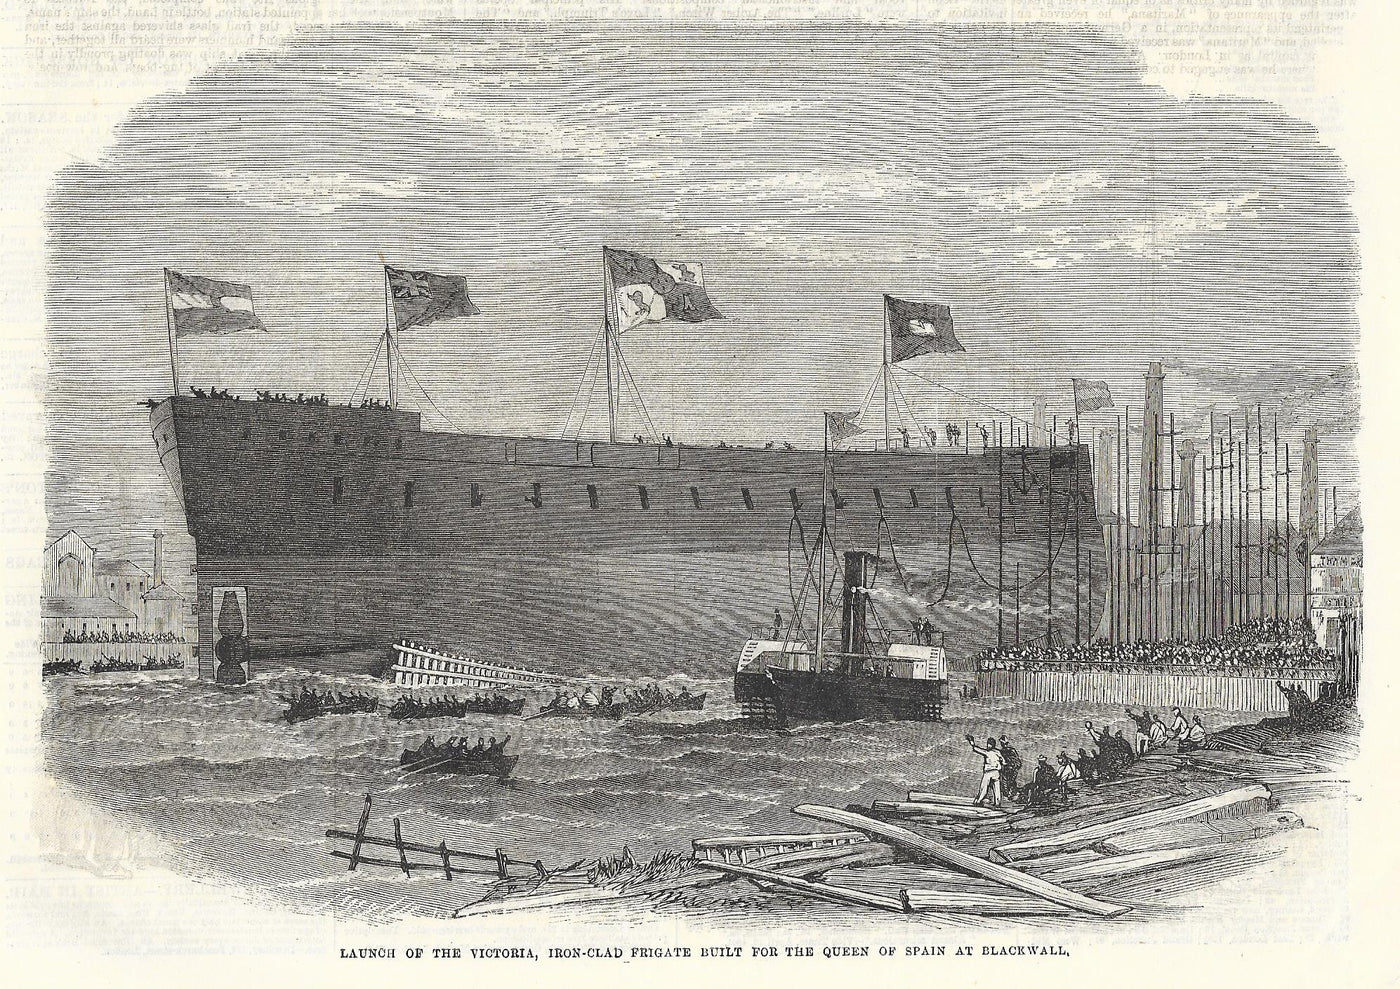 Blackwall launch of the frigate Victoria antique print 1865